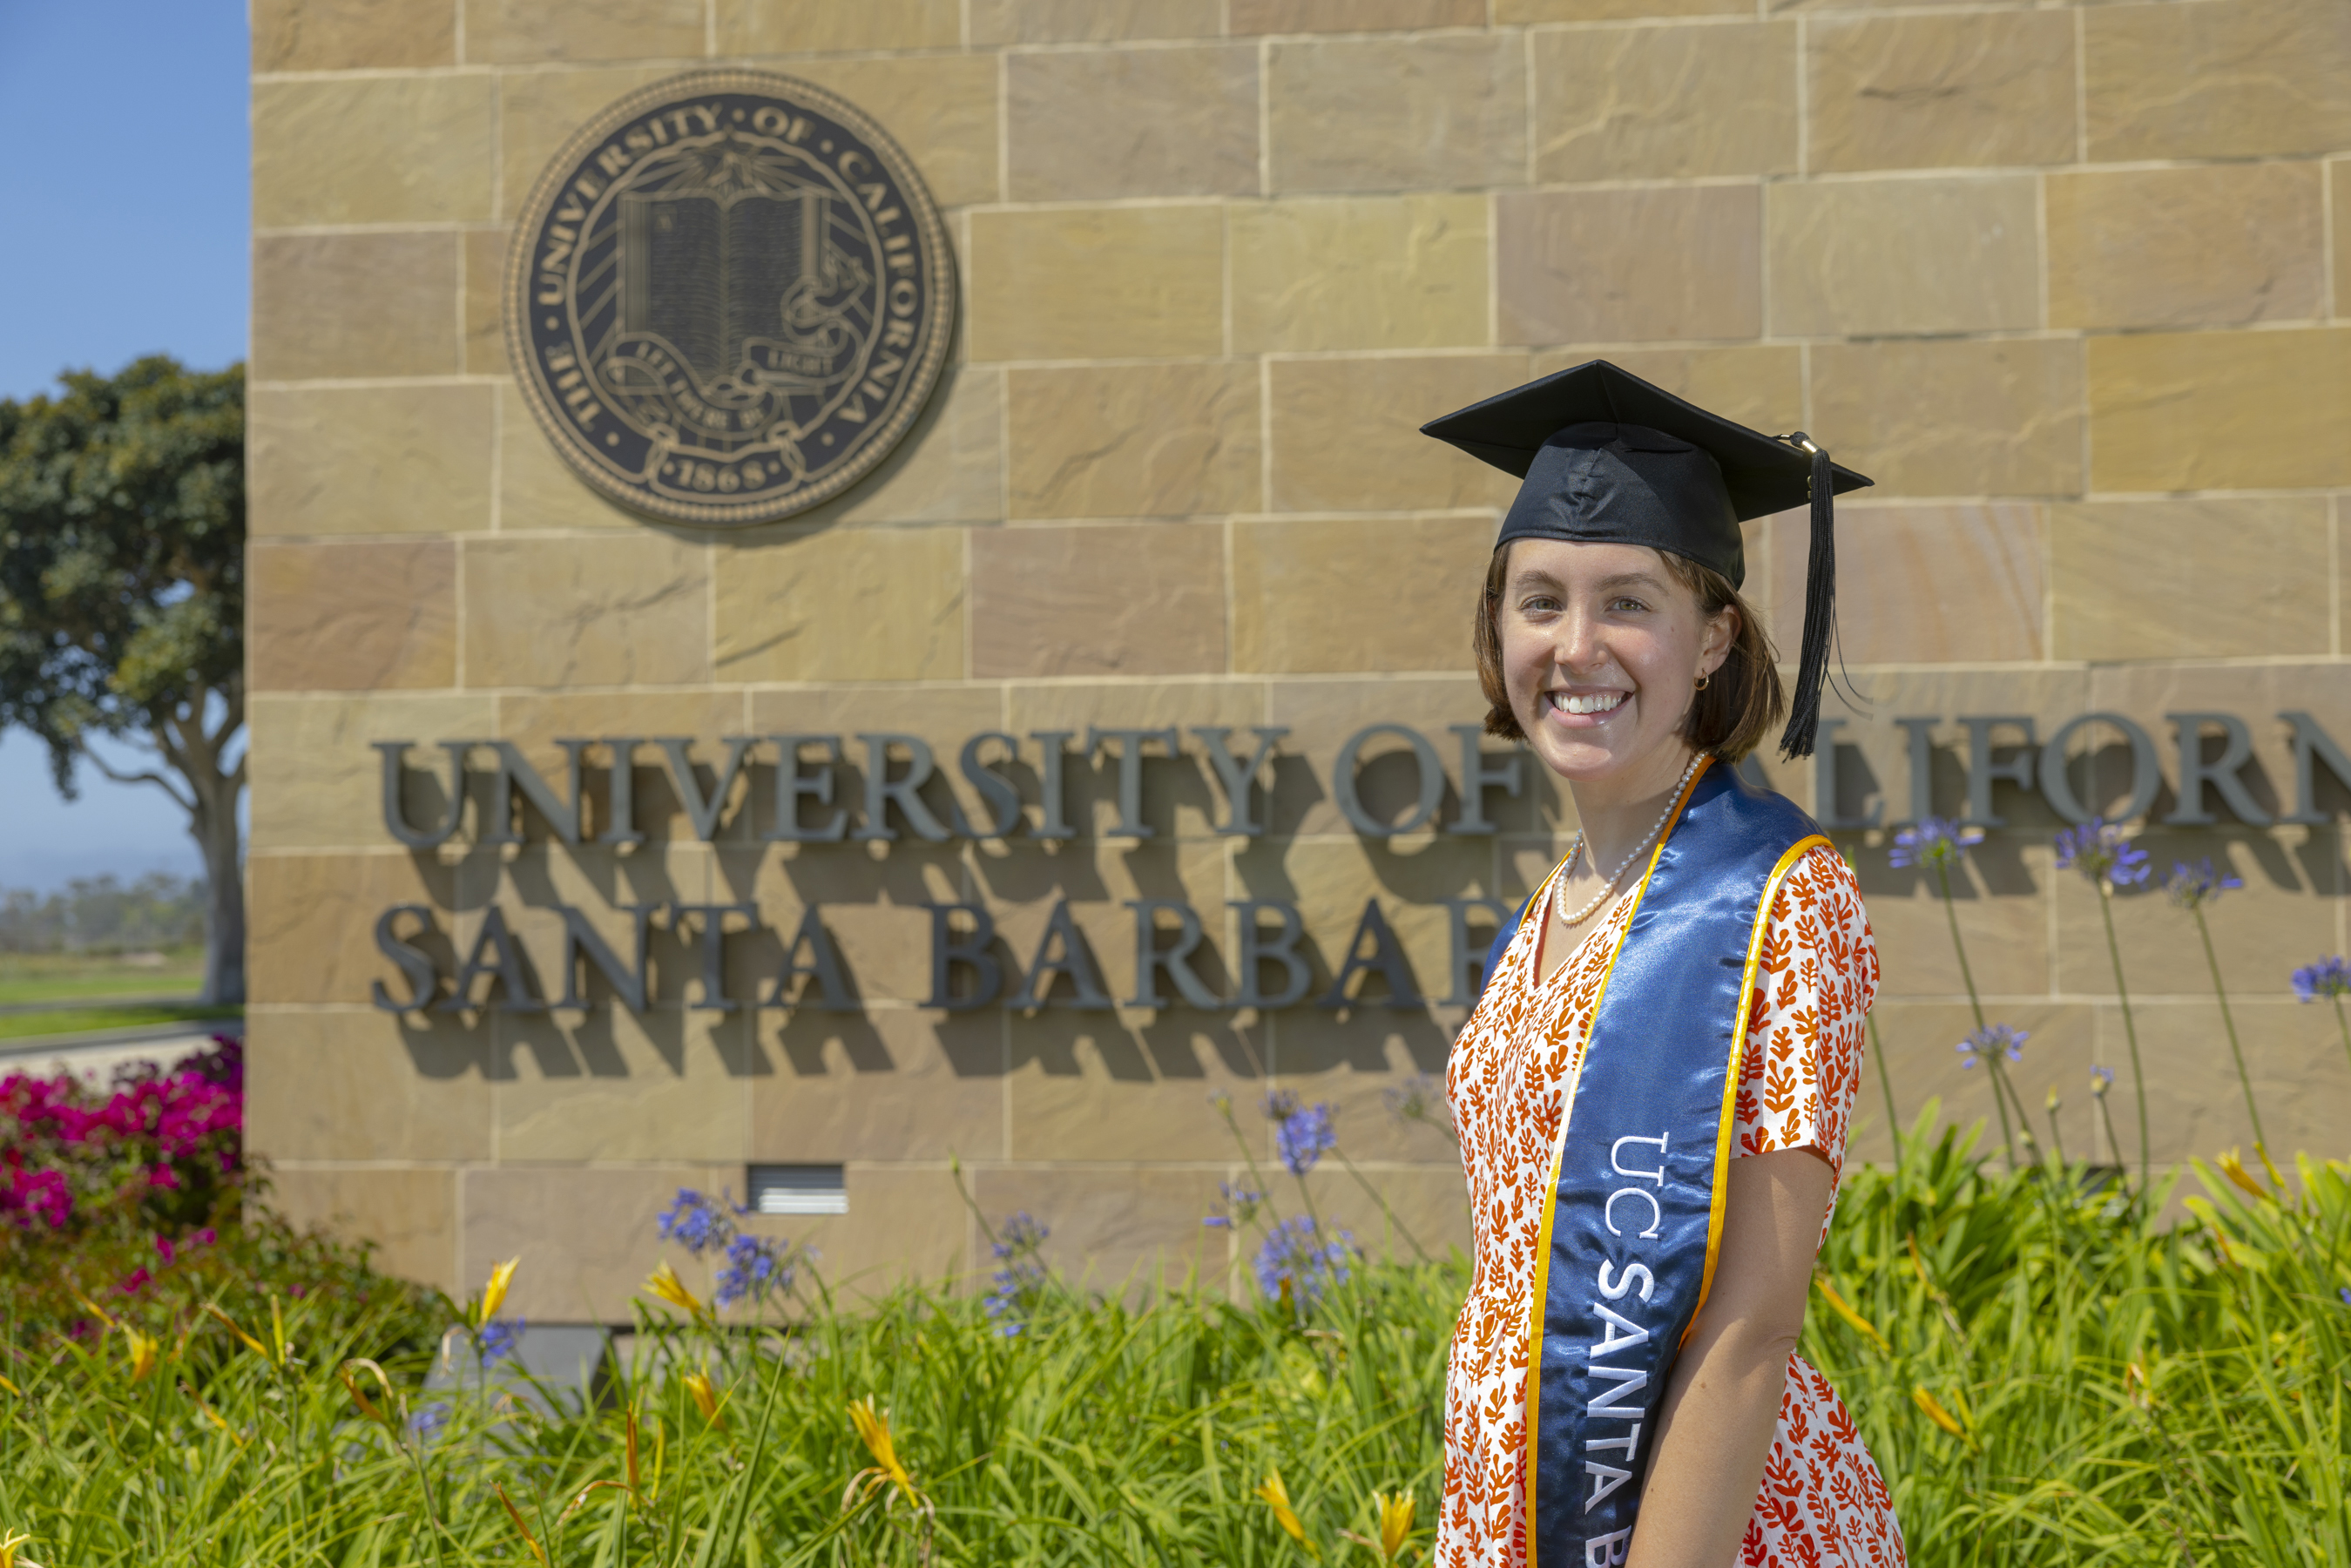 Scout dressed in graduation regalia for graduating from her Master degree. Scout wears a black grad cap and a red Matrisse-esque print dress. She stands in front of a sand-colored stone wall that reads 'University of California Santa Barbara,' framed by blue skies and green grass.